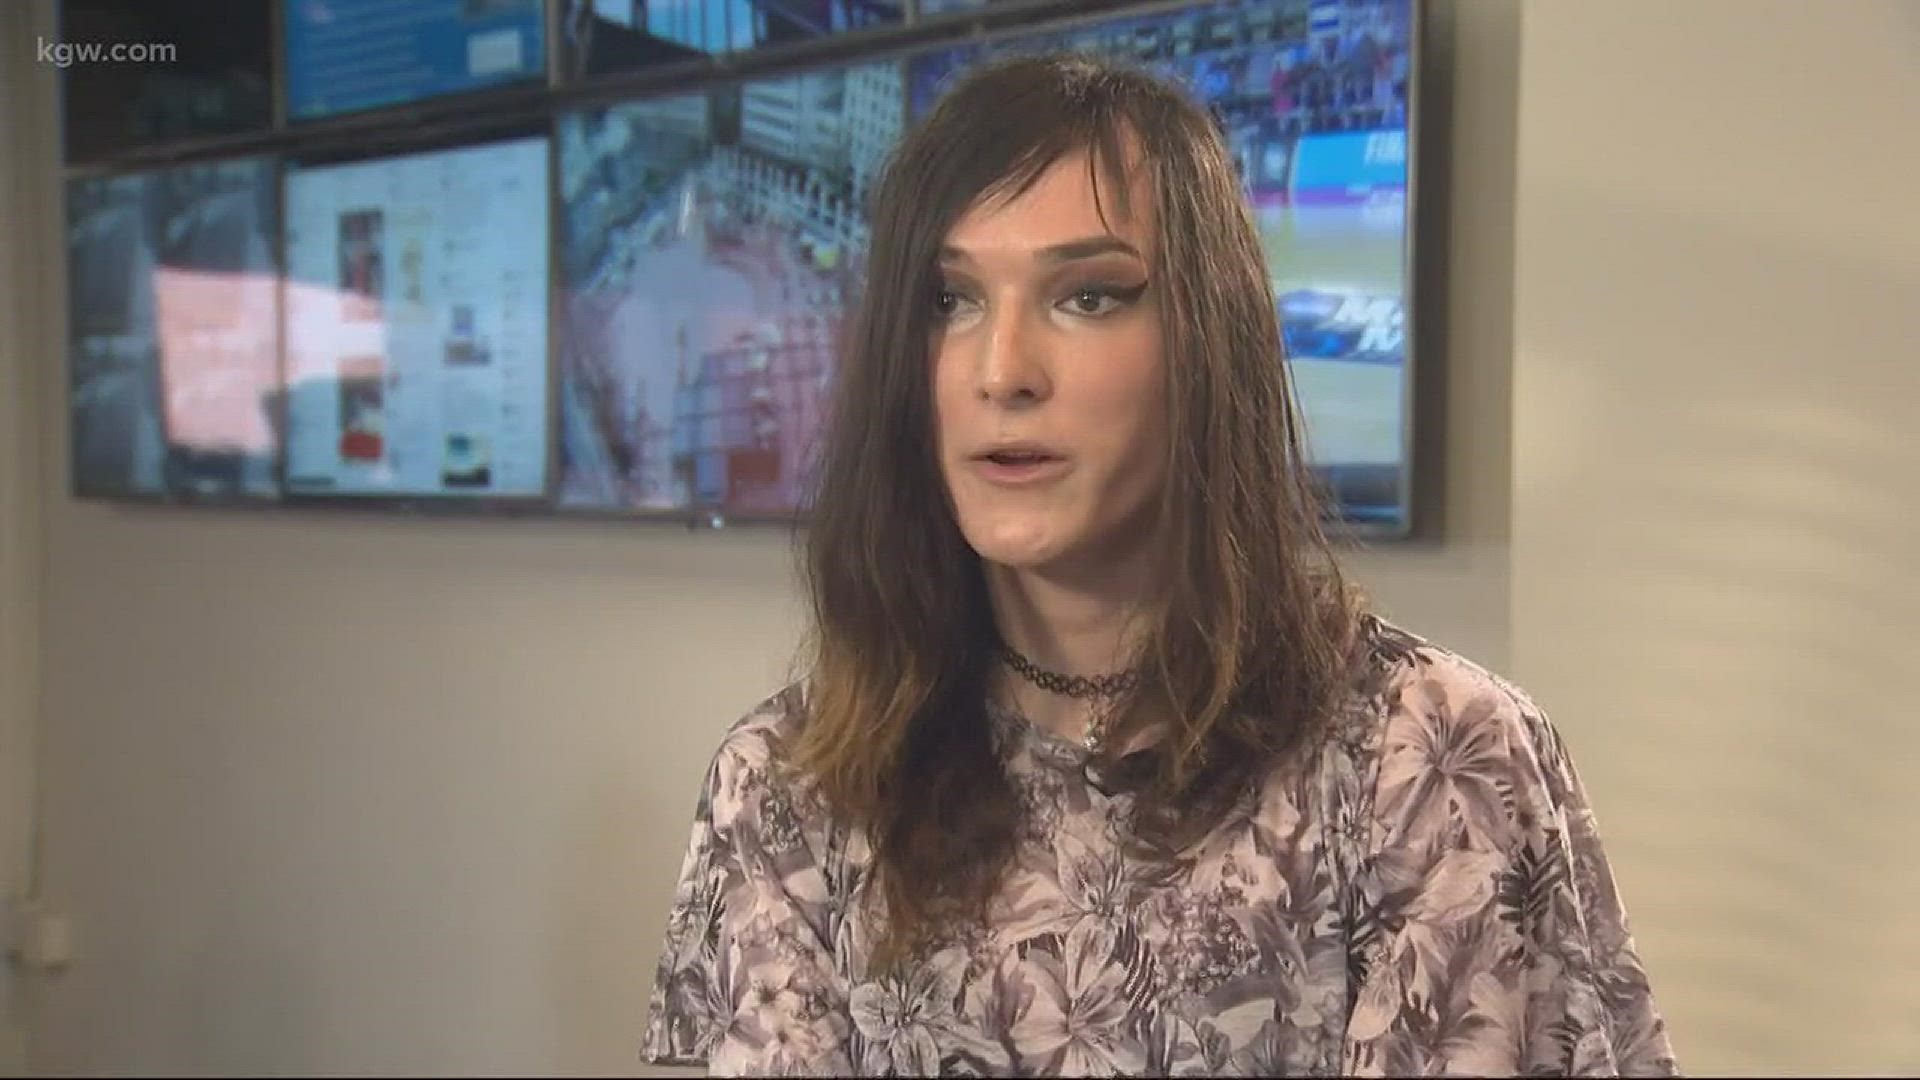 A transgender woman is suing after she was deleted from Tinder.